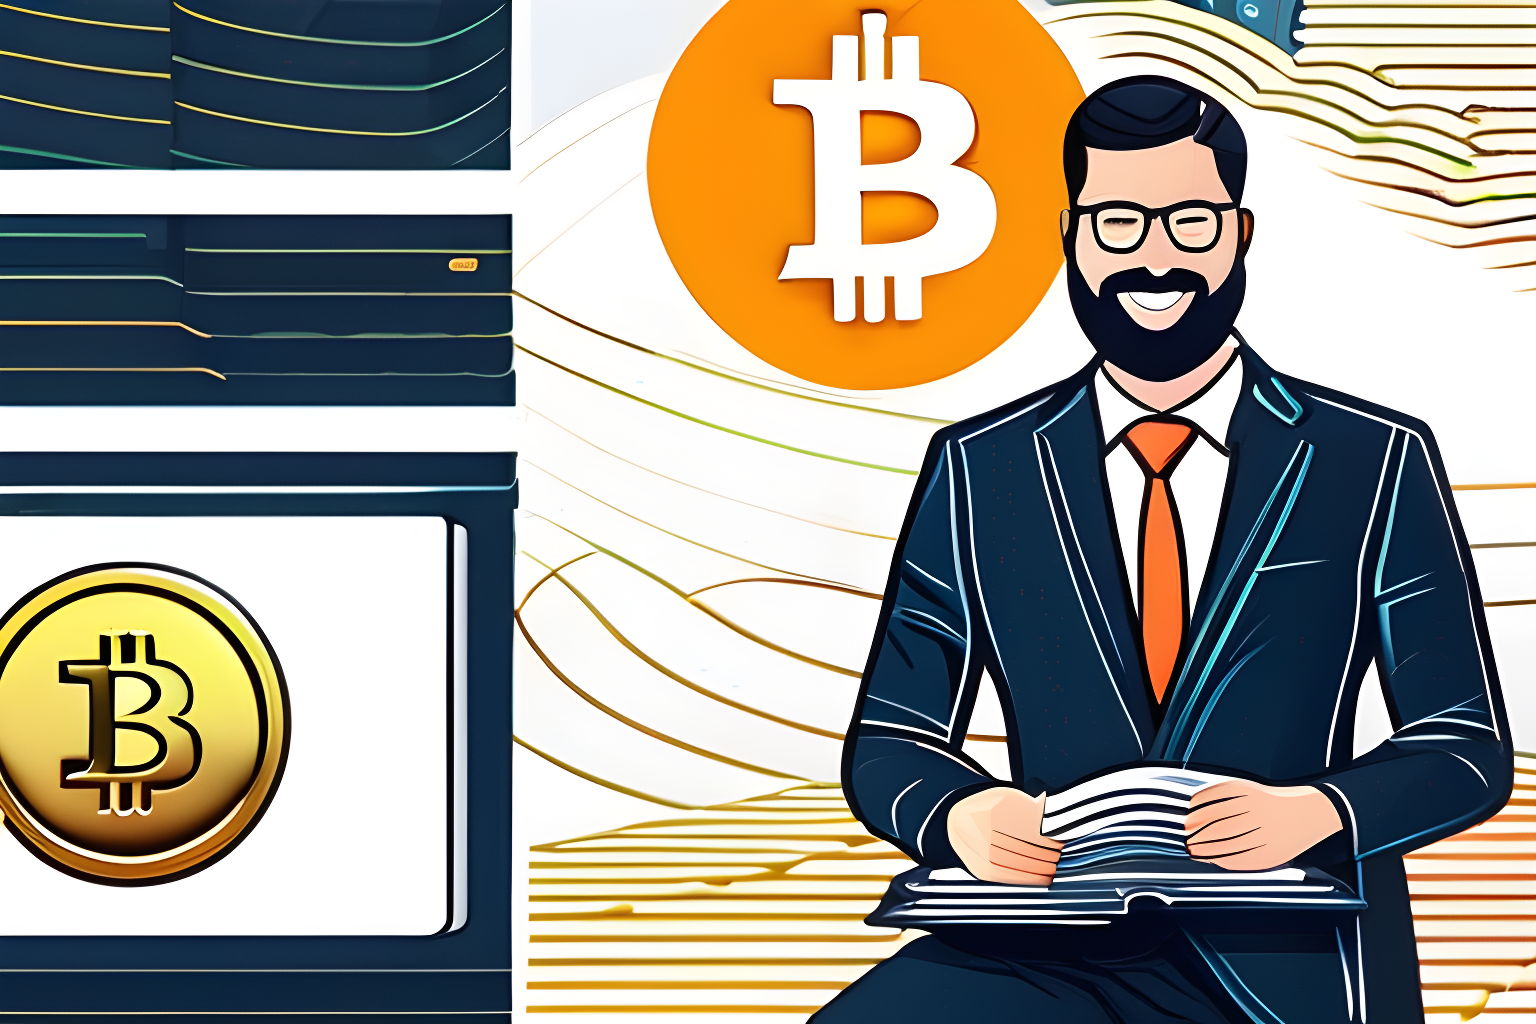 Illustrate a textbook for cryptocurrencies